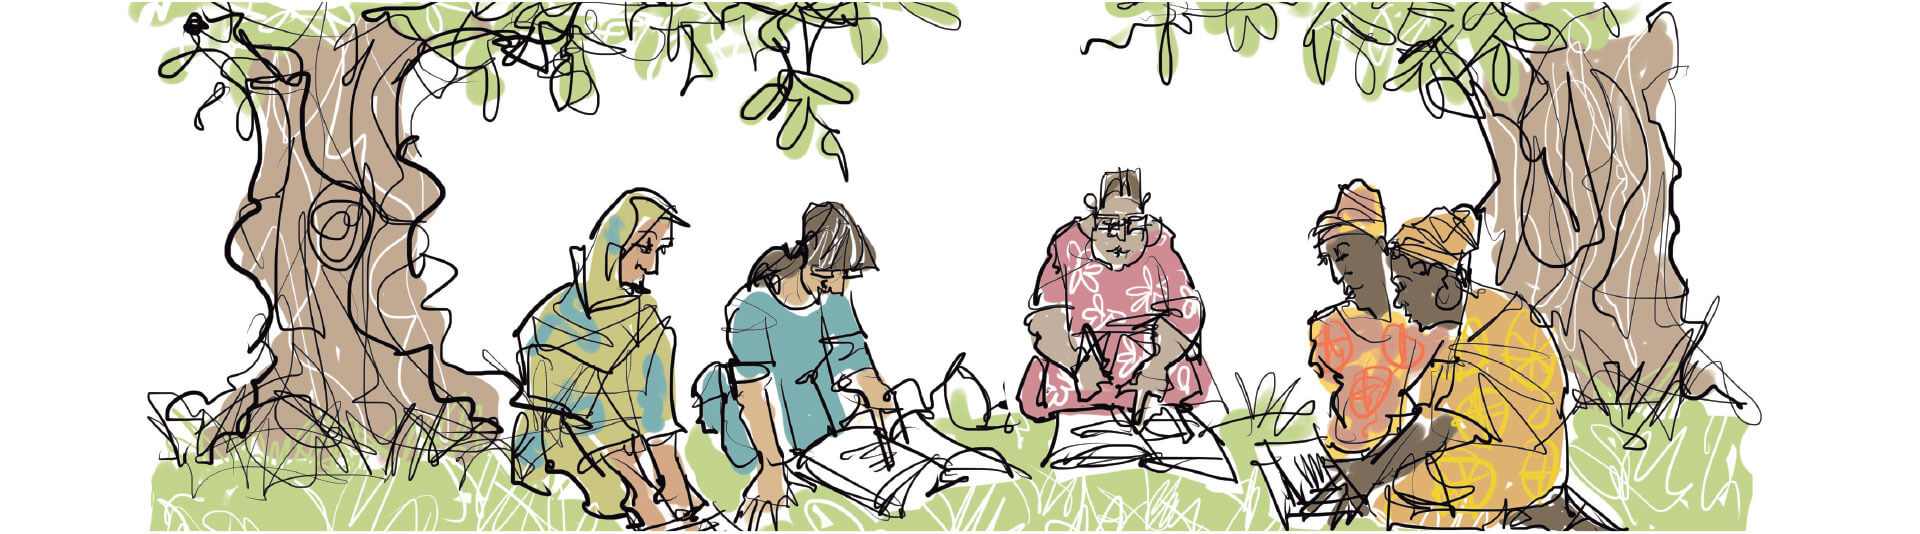 An illustration of five women sitting in a circle in the shade of two trees and referring to books, representing an outdoor participatory learning environment. It is not obvious whom, if anyone, is facilitating the group session.